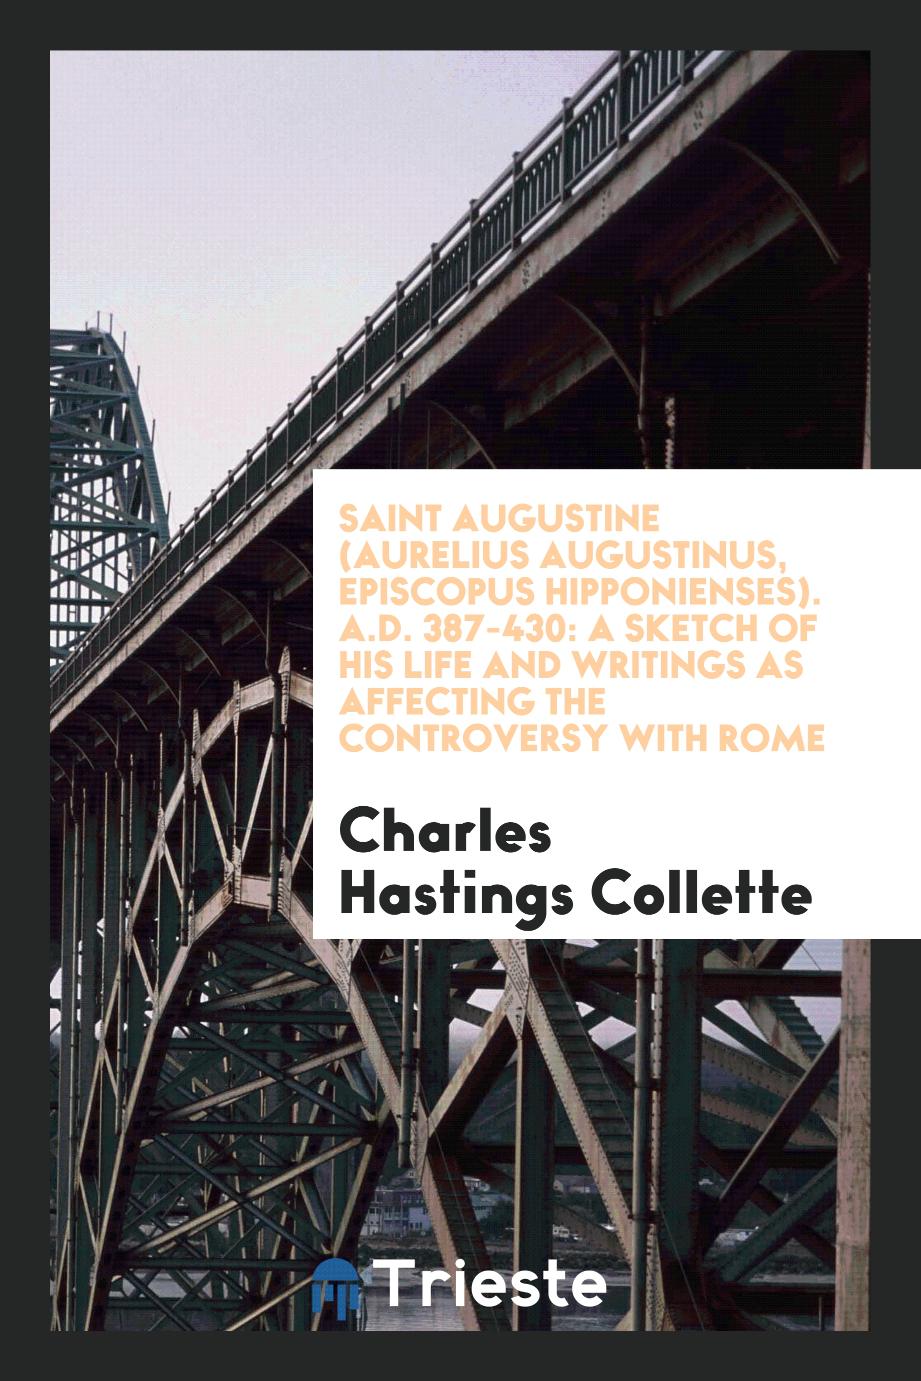 Saint Augustine (Aurelius Augustinus, Episcopus Hipponienses). A.D. 387-430: A Sketch of His Life and Writings as Affecting the Controversy with Rome